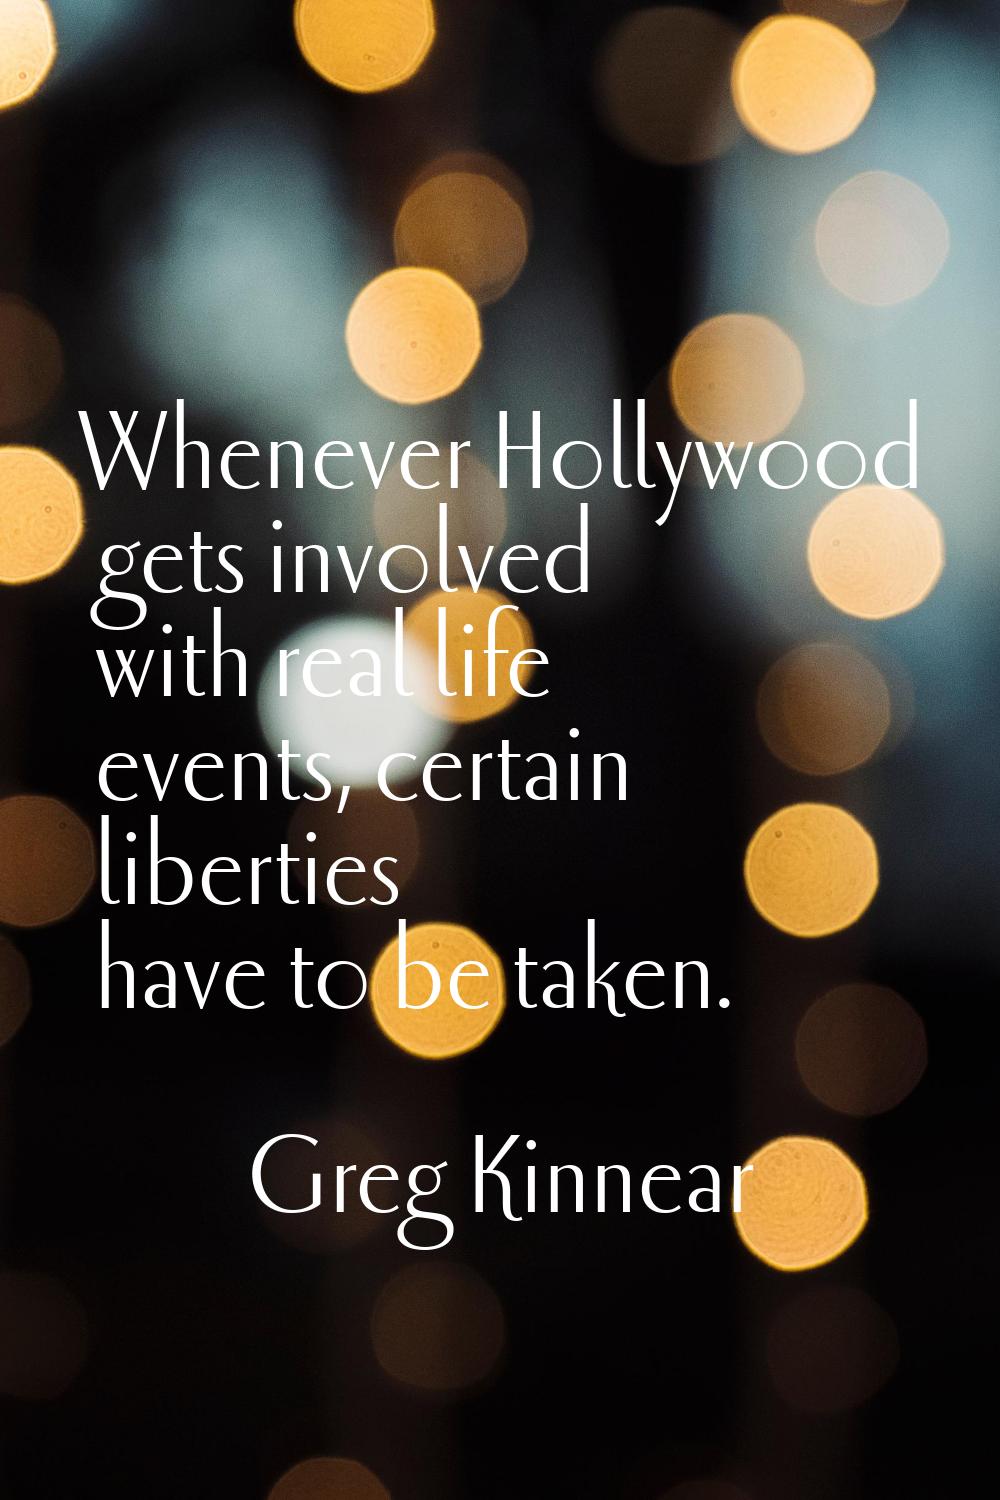 Whenever Hollywood gets involved with real life events, certain liberties have to be taken.